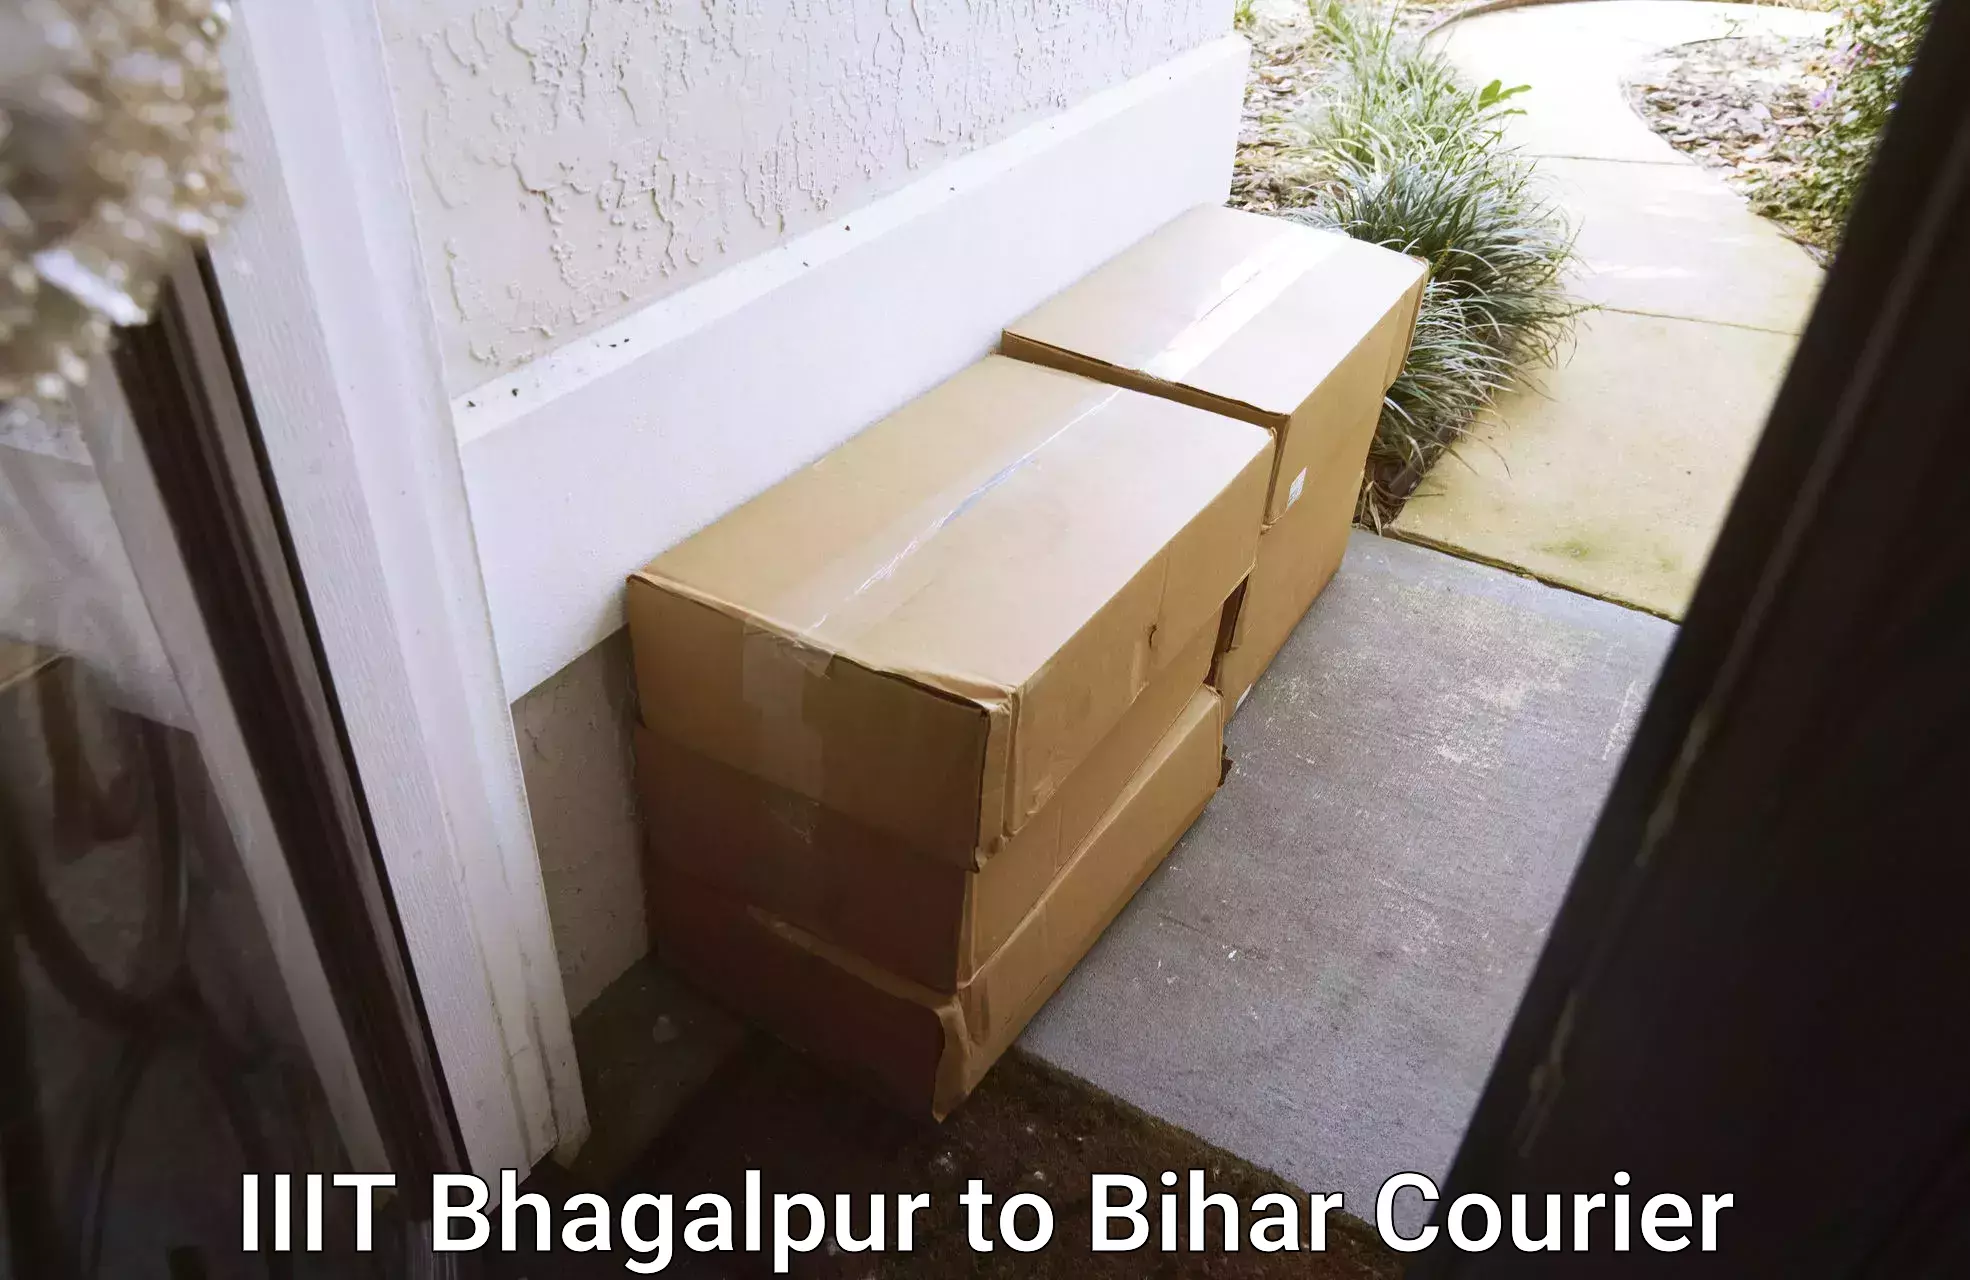 Trusted moving company IIIT Bhagalpur to Bankipore